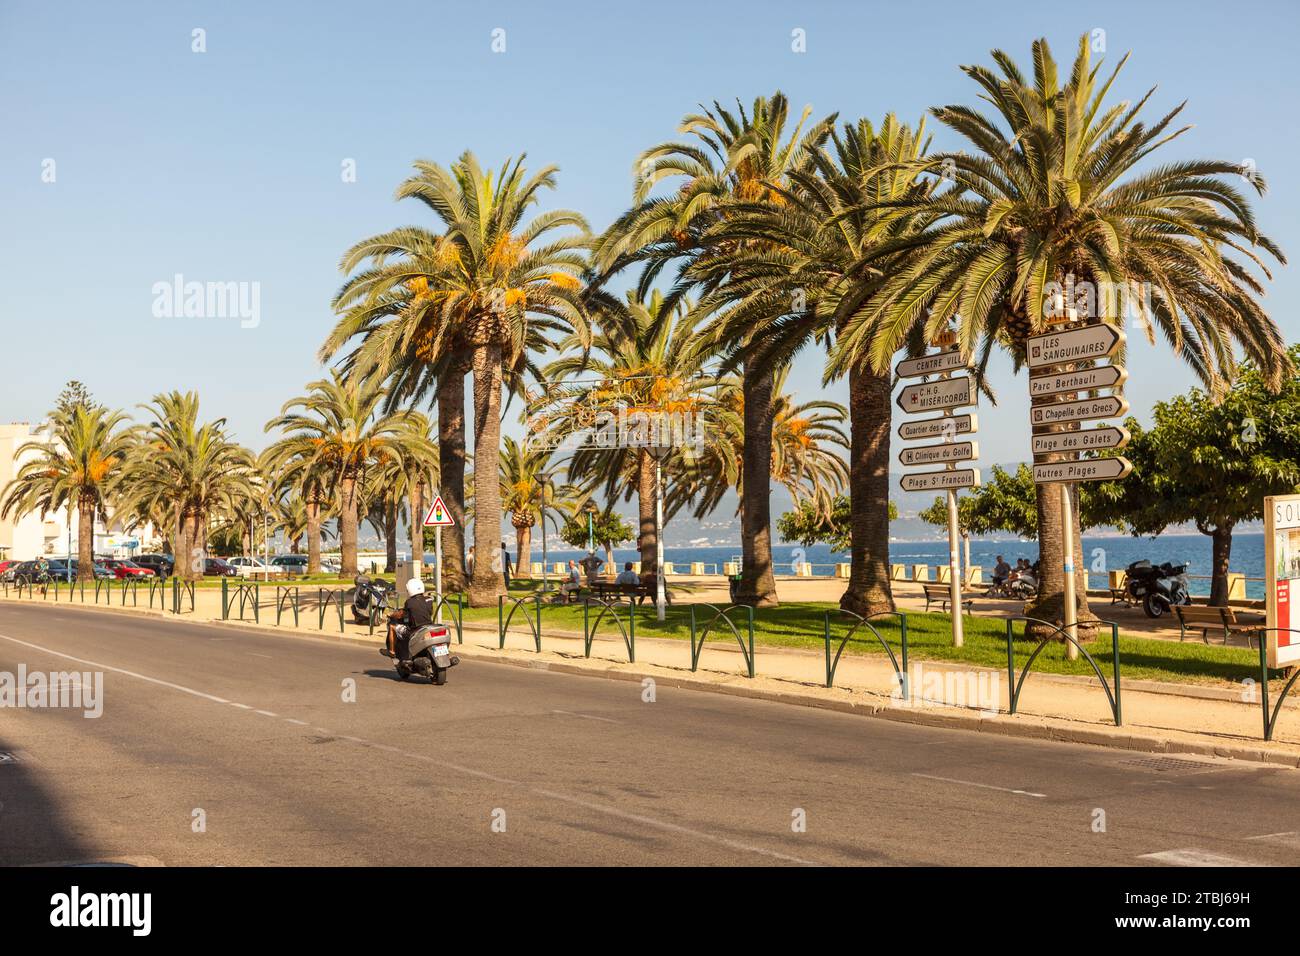 Motorcyclist on the road lined with palm trees by the Mediterranean. Ajaccio, Corsica, France. Stock Photo